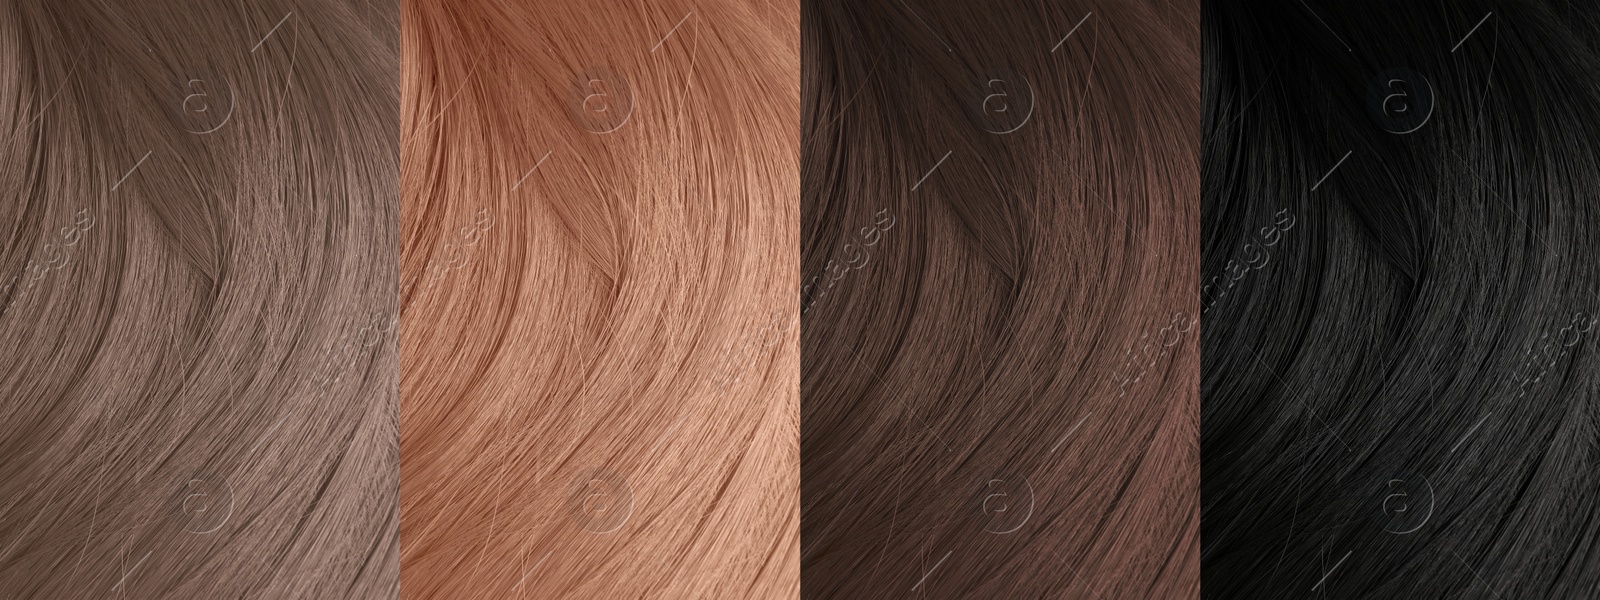 Image of Collage of color hair samples, closeup. Banner design